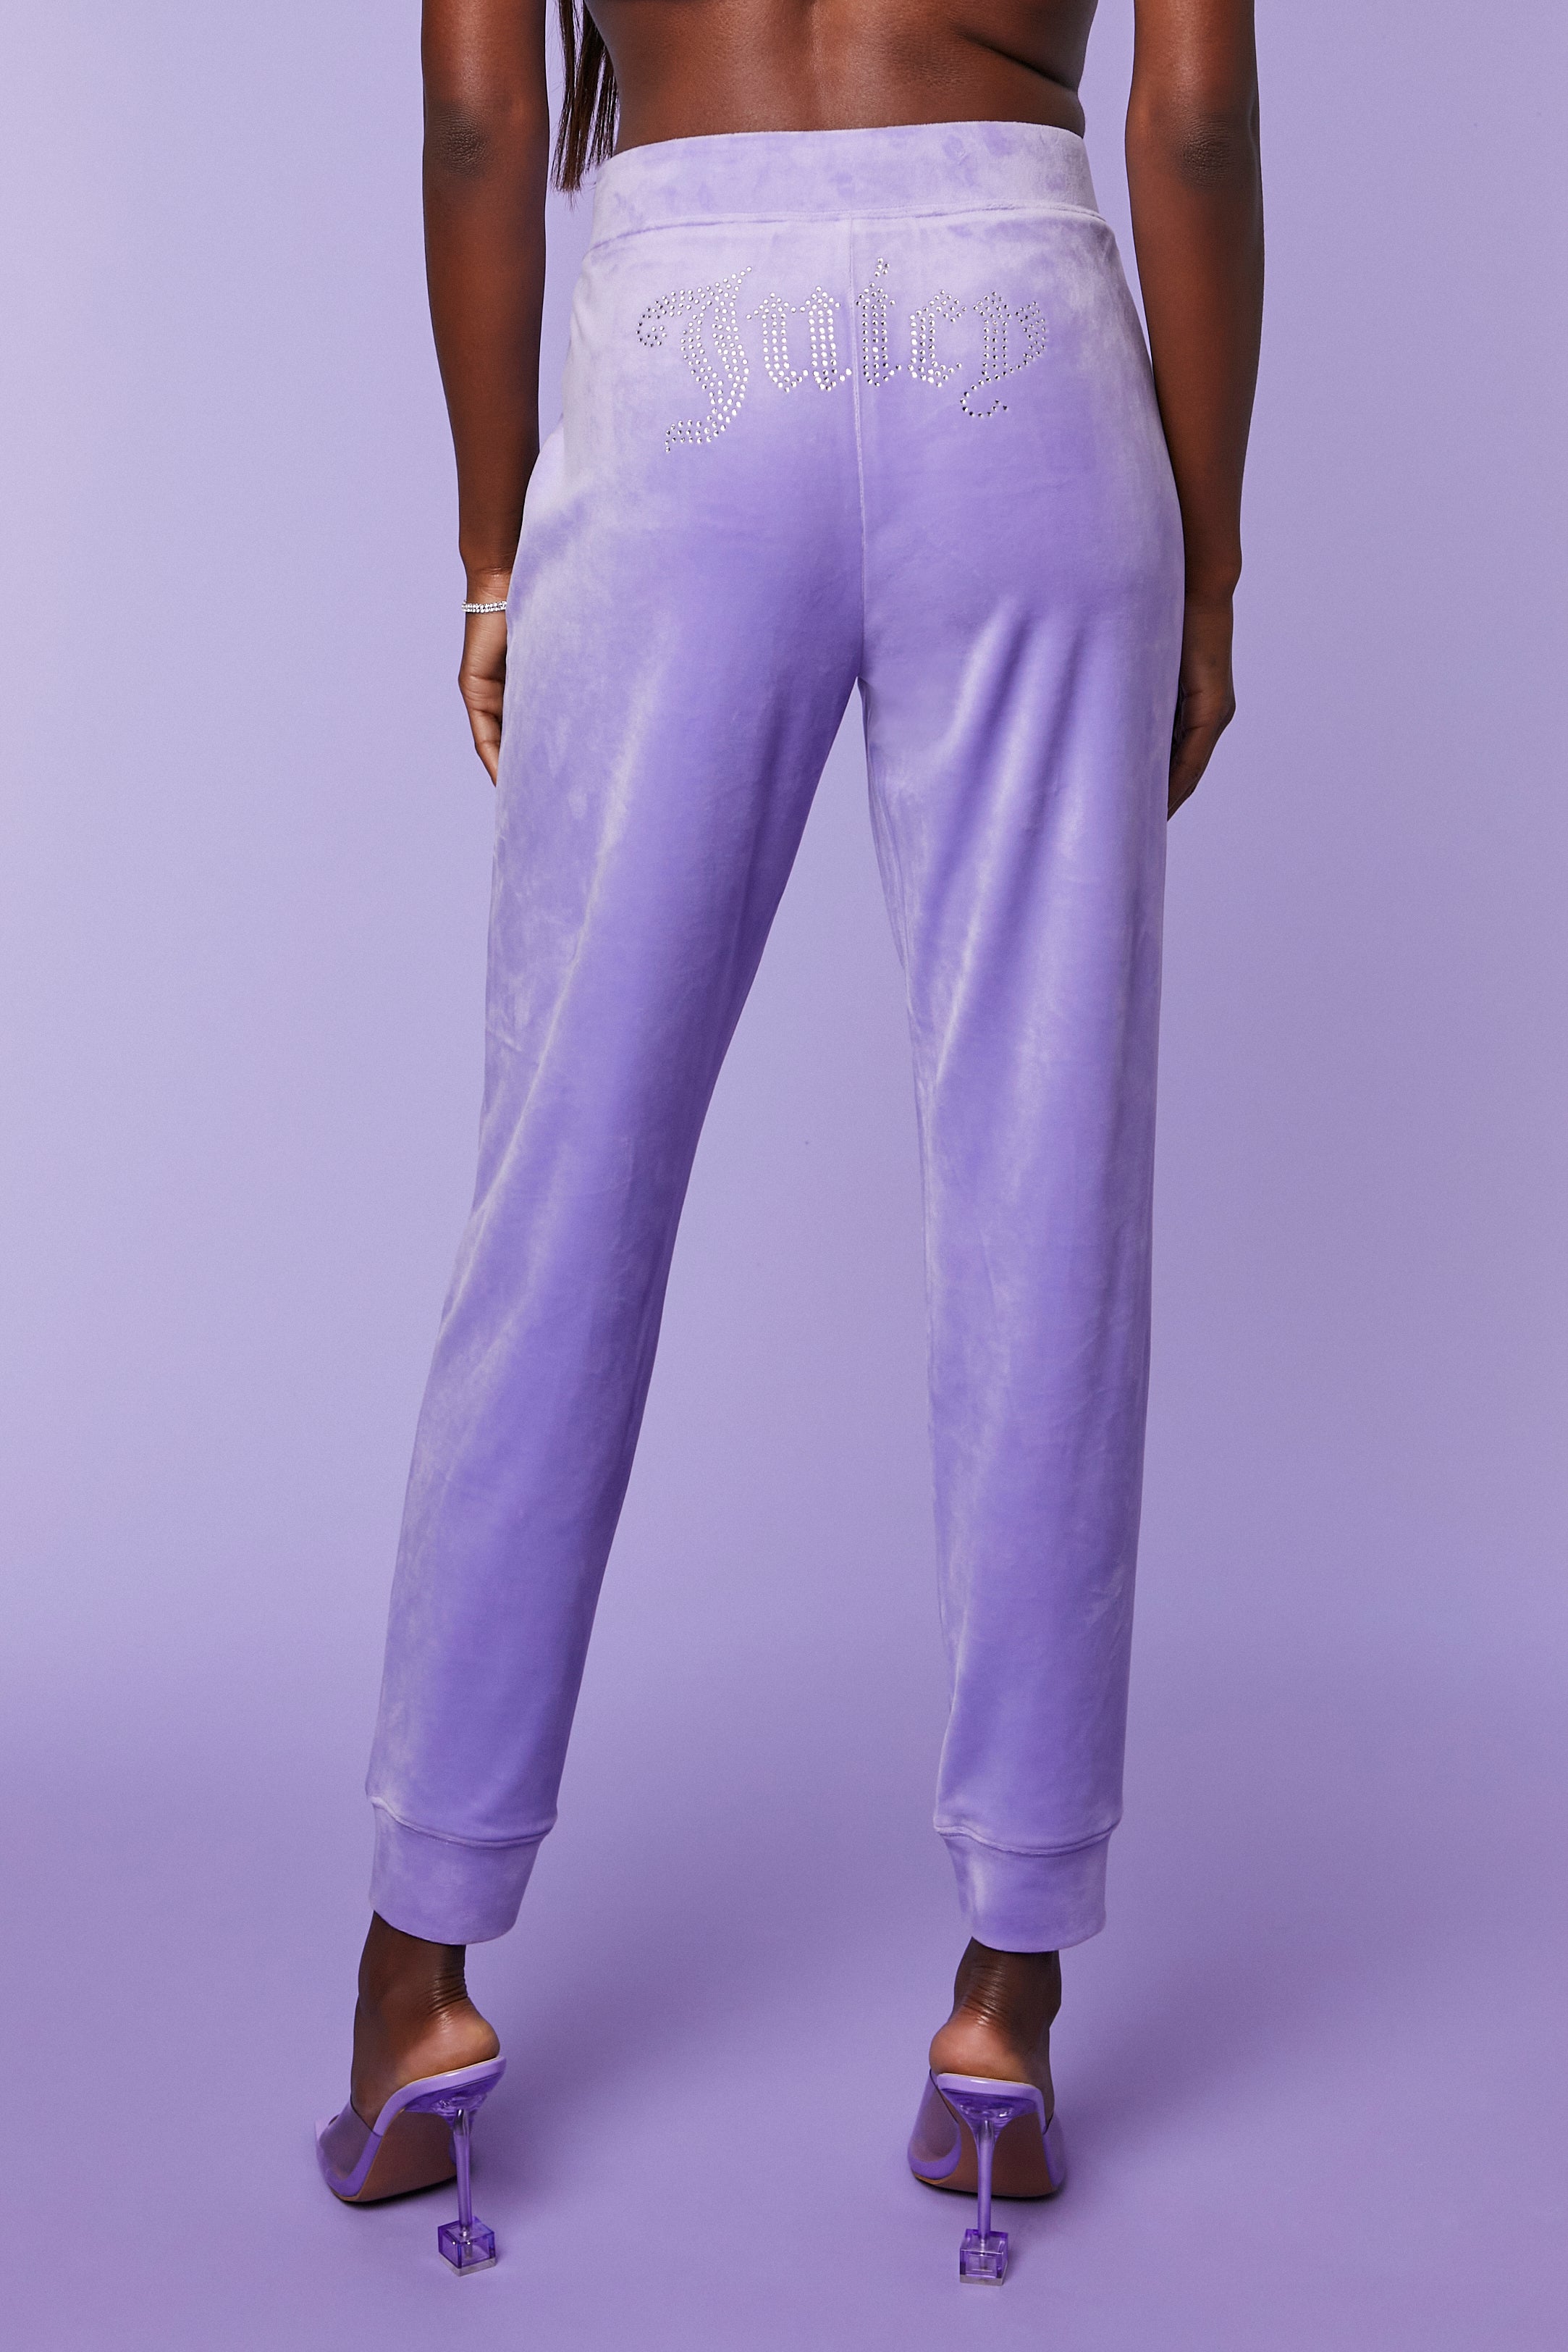 Lavender Juicy Couture Rhinestone Joggers 4